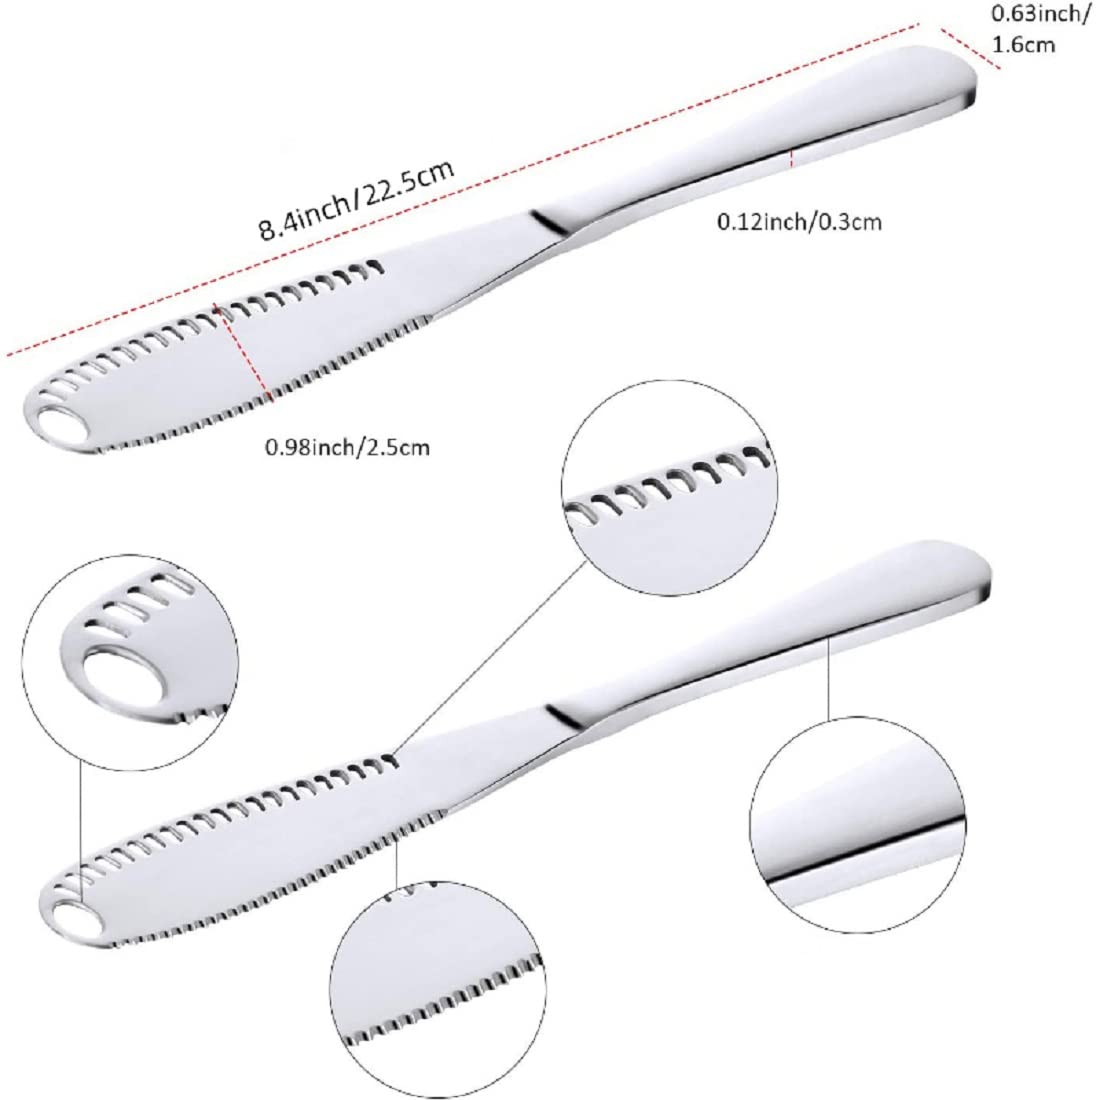 Stainless steel butter knife details